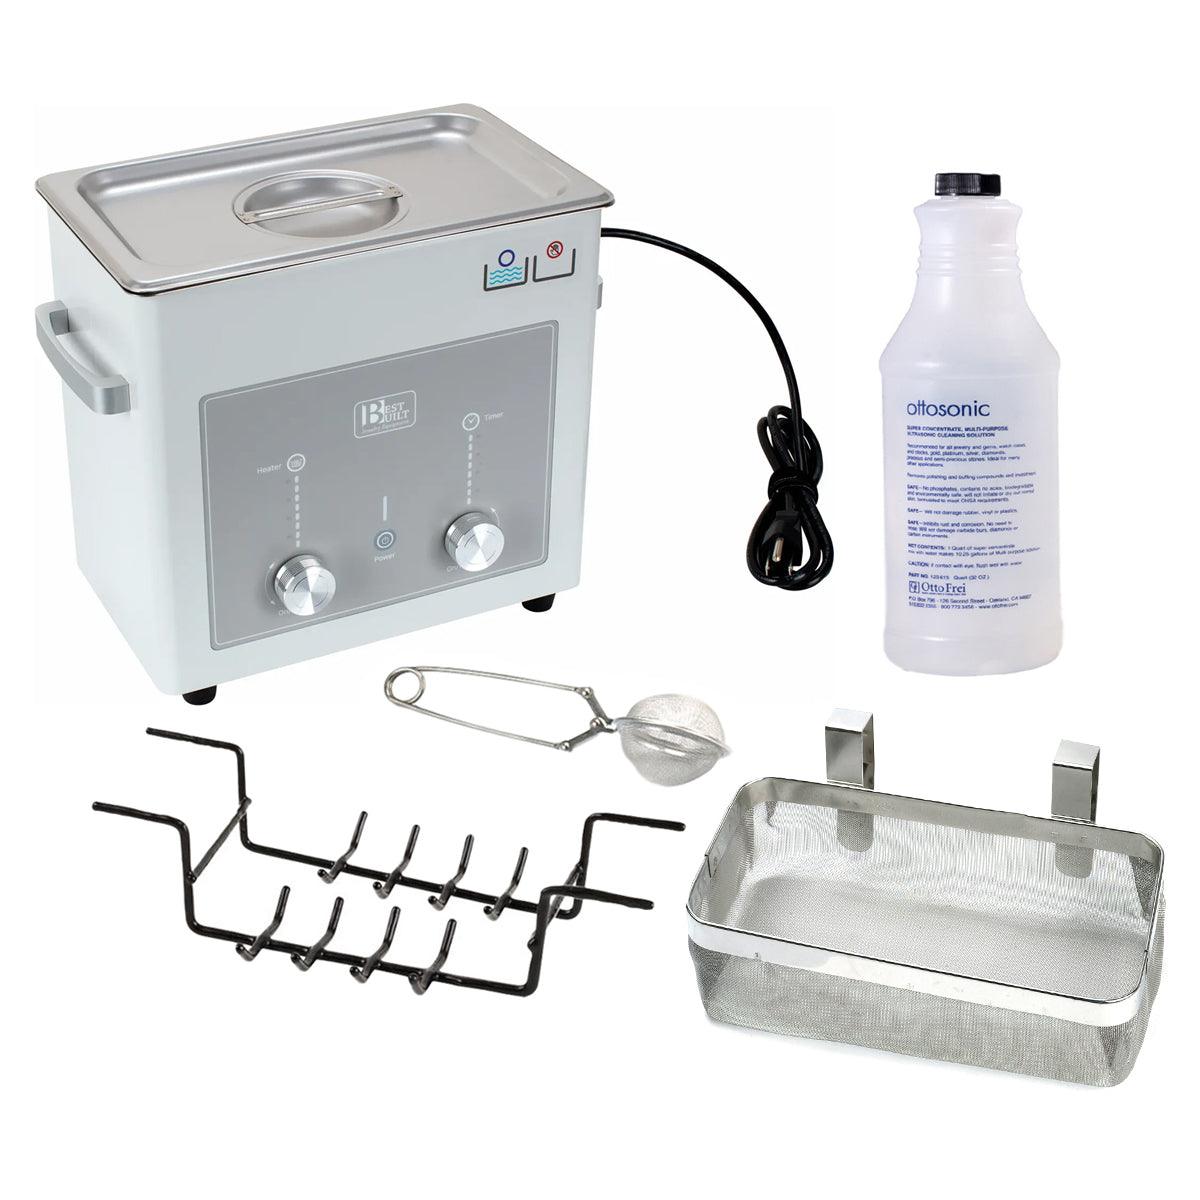 Sonic Cleaning Tarnished Silver - iUltrasonic Ultrasonic Cleaners